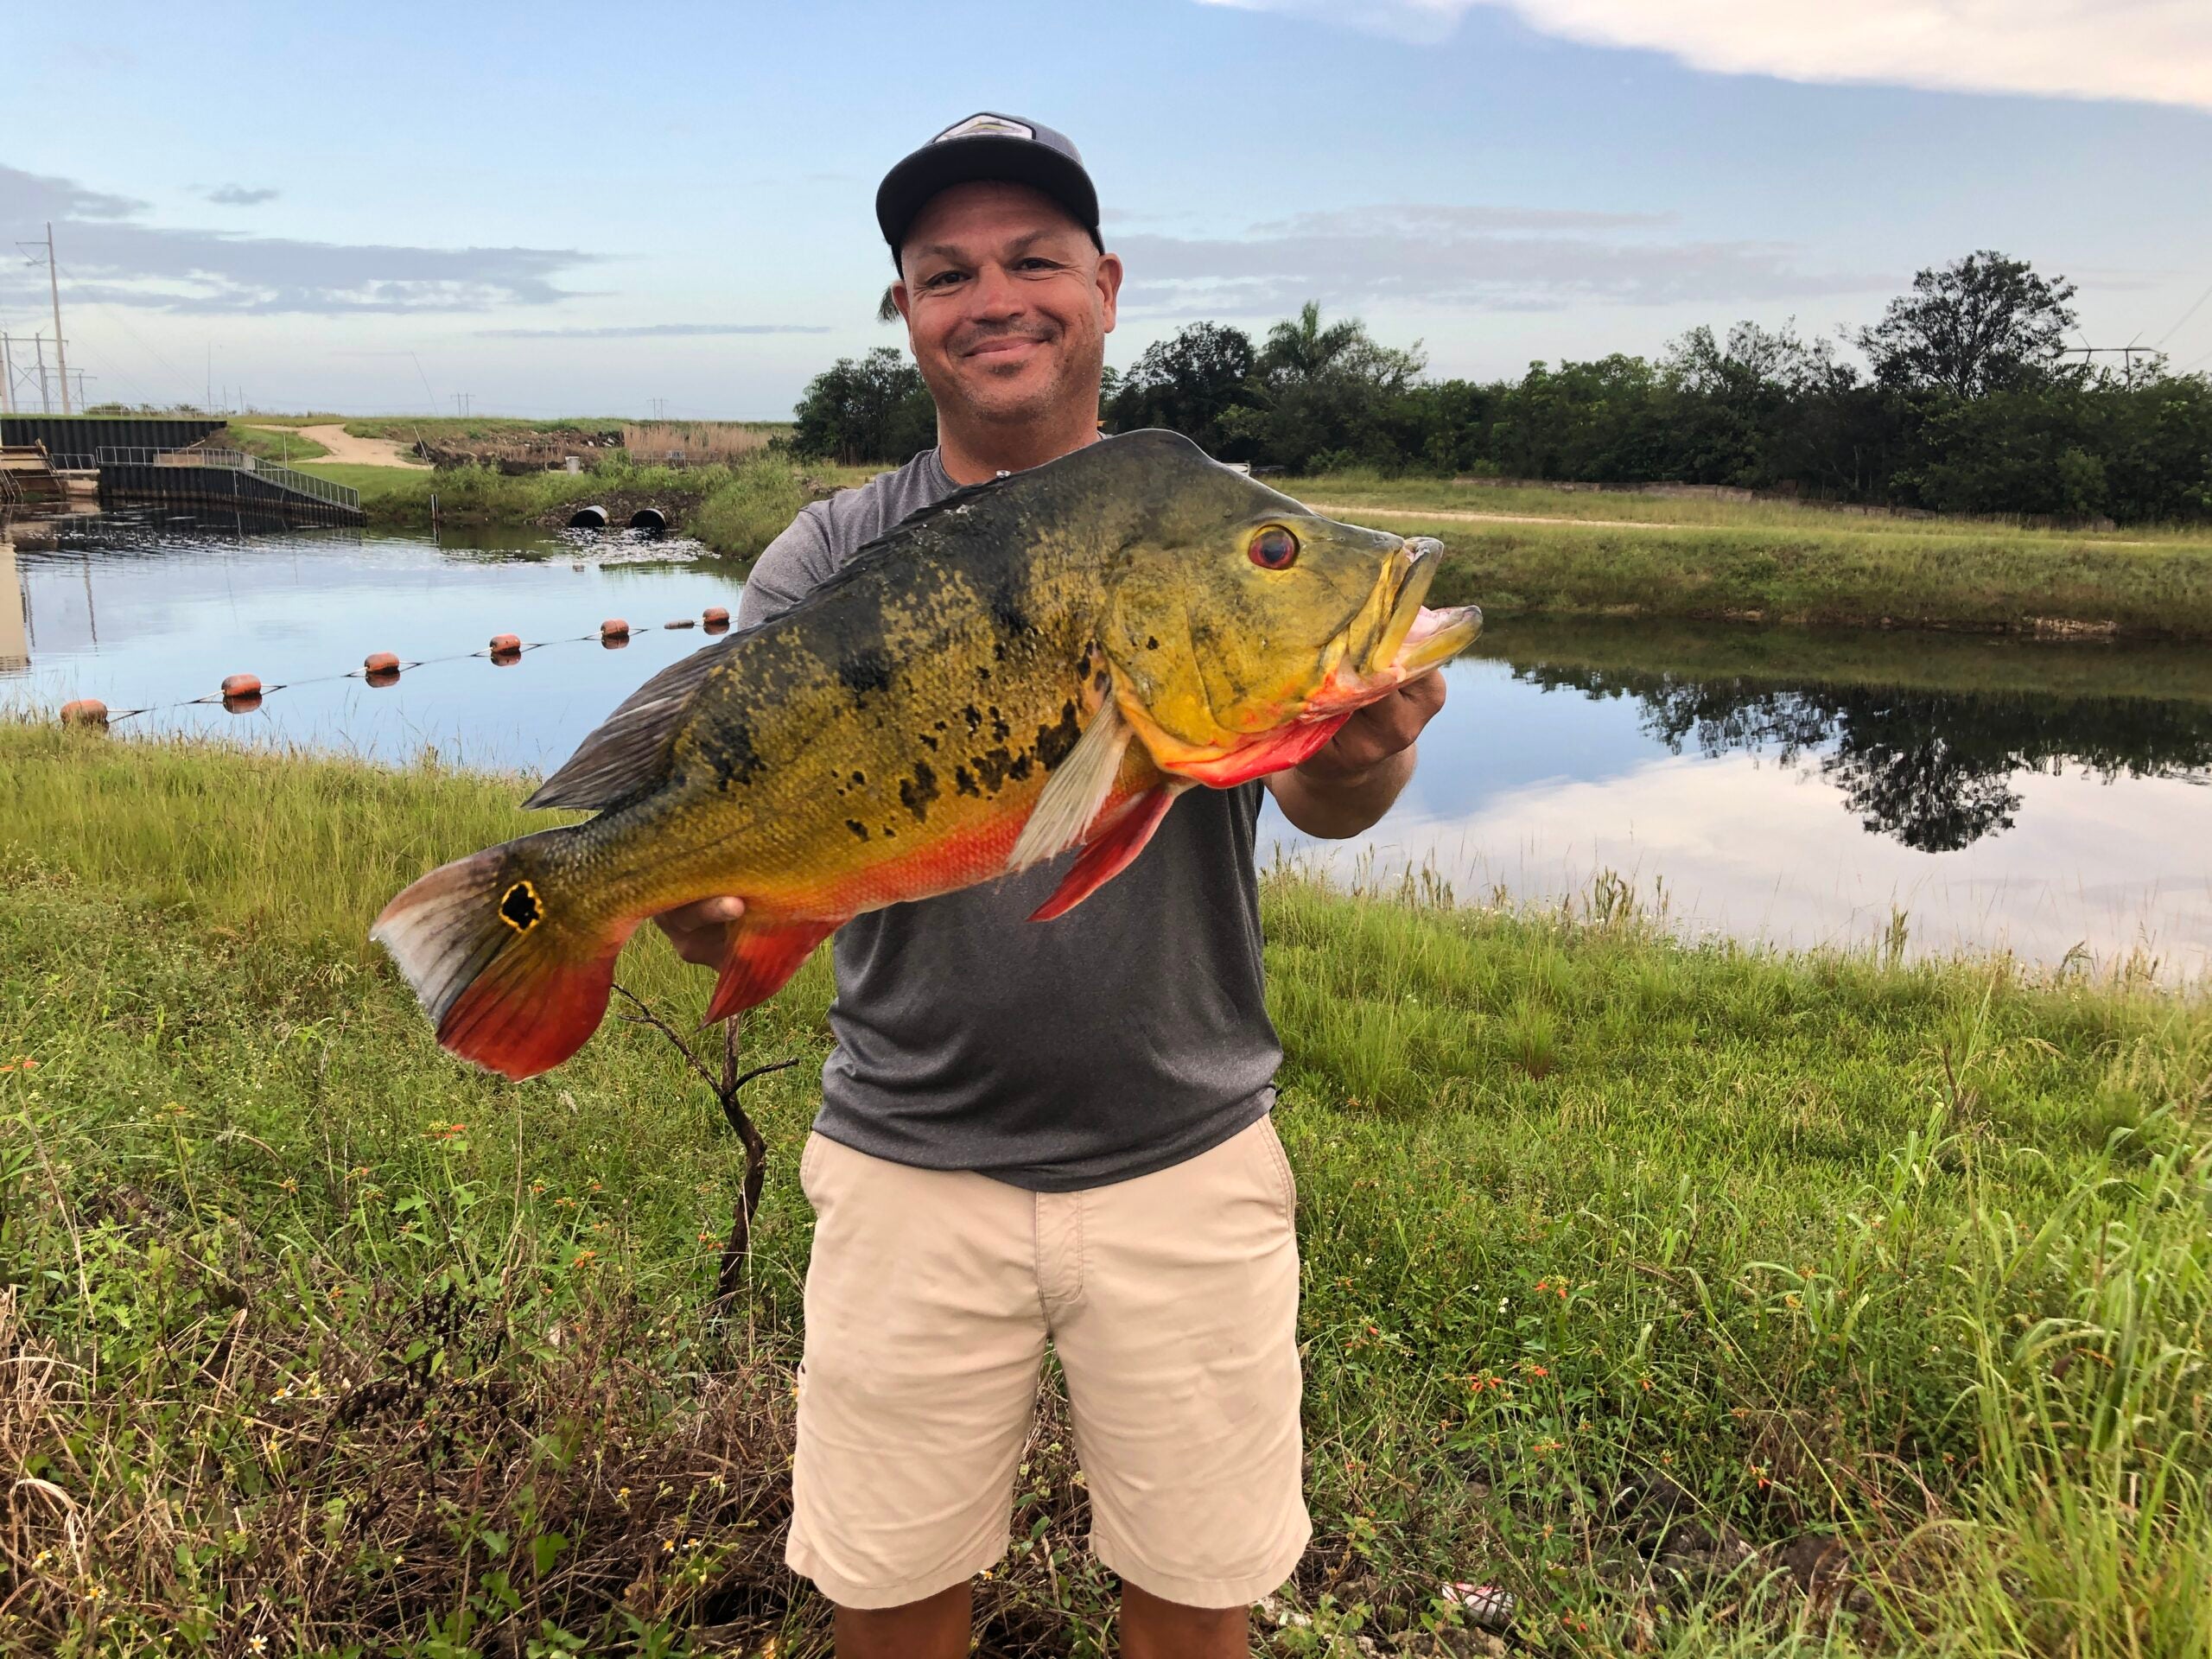 Angler Breaks State Record with 9-Pound Peacock Bass